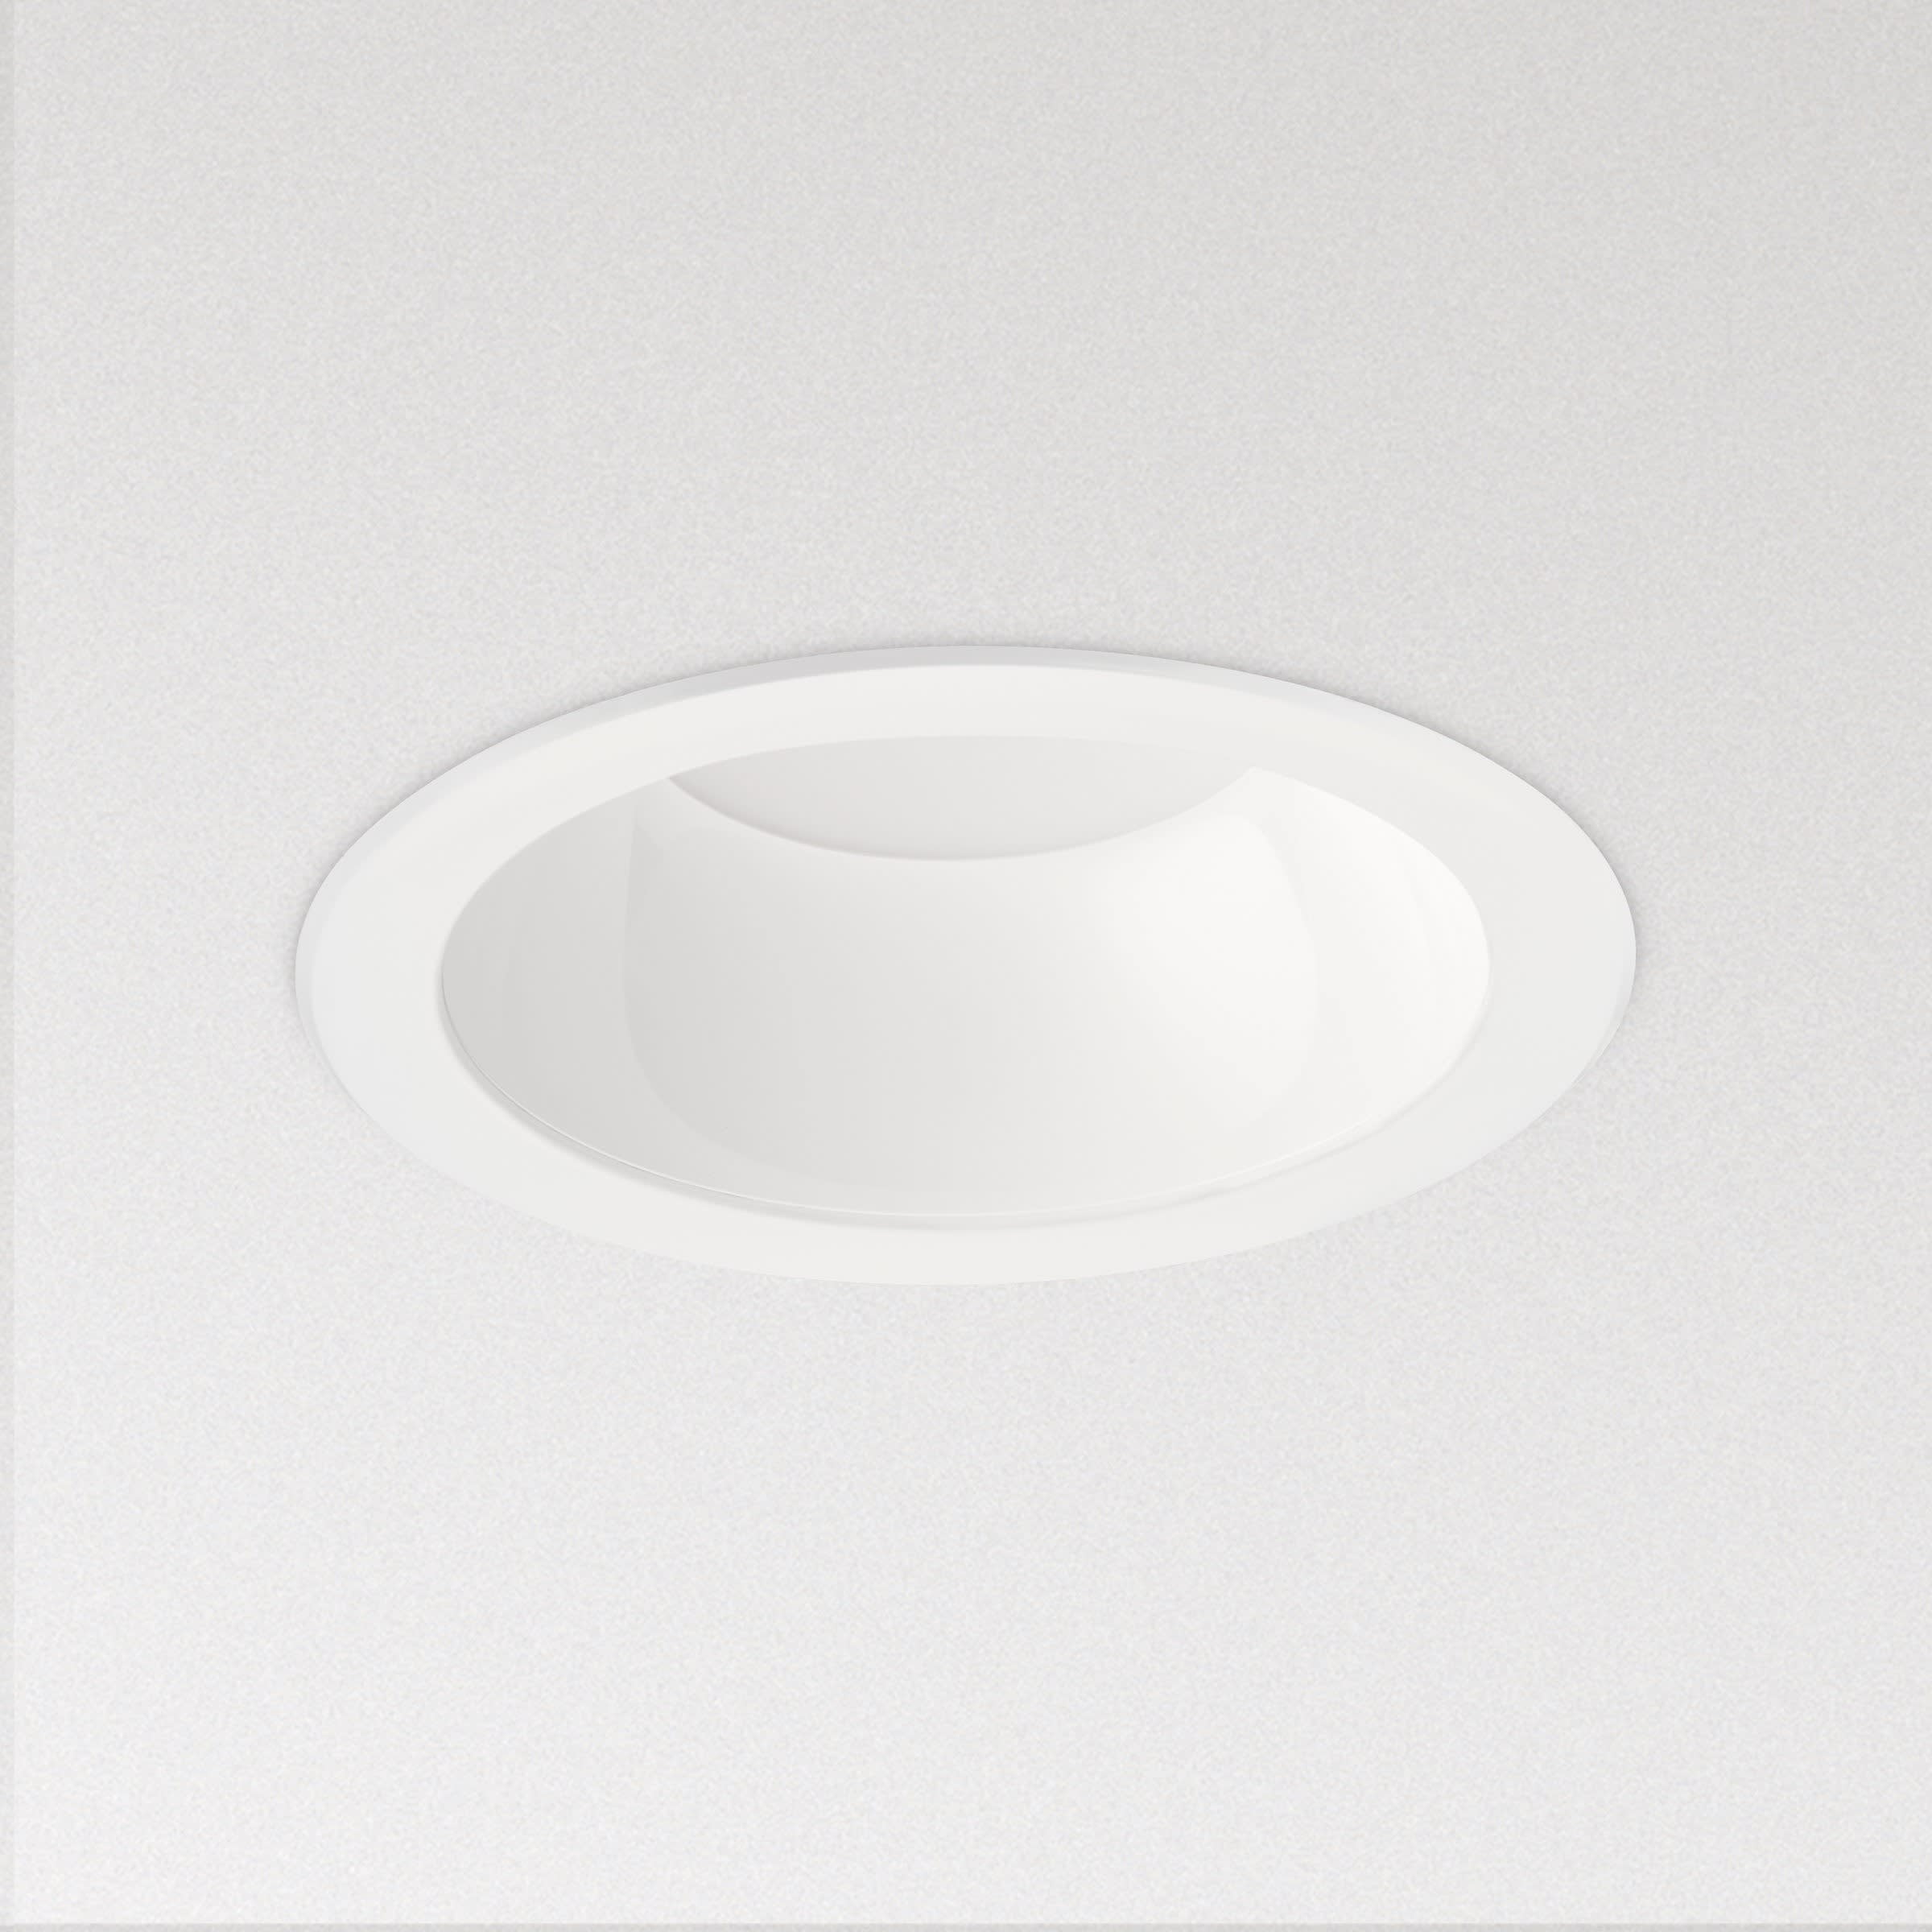 Philips - CoreLine Downlight LED D150 DN140B 840 On-Off UGR25 10W 1000lm 50000h L70